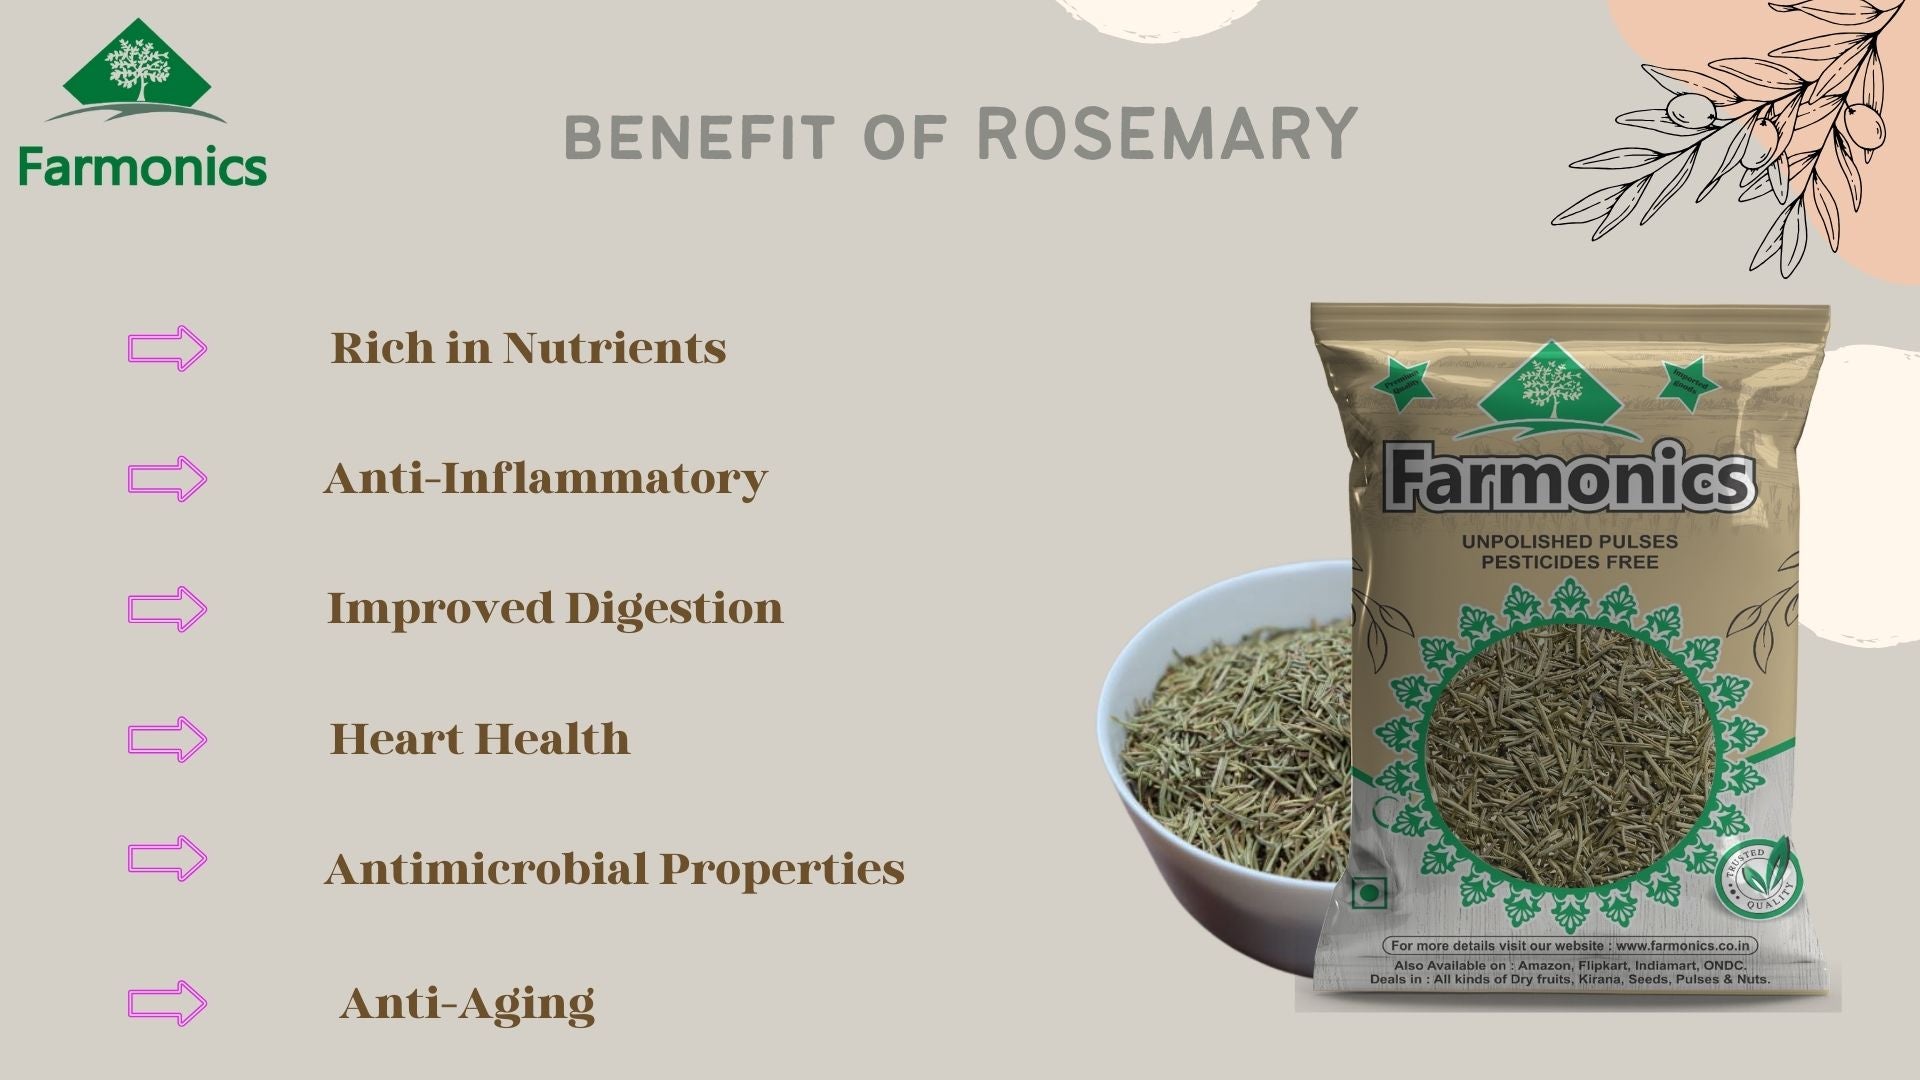 Benefist you will get from Farmonics best quality rosemary 